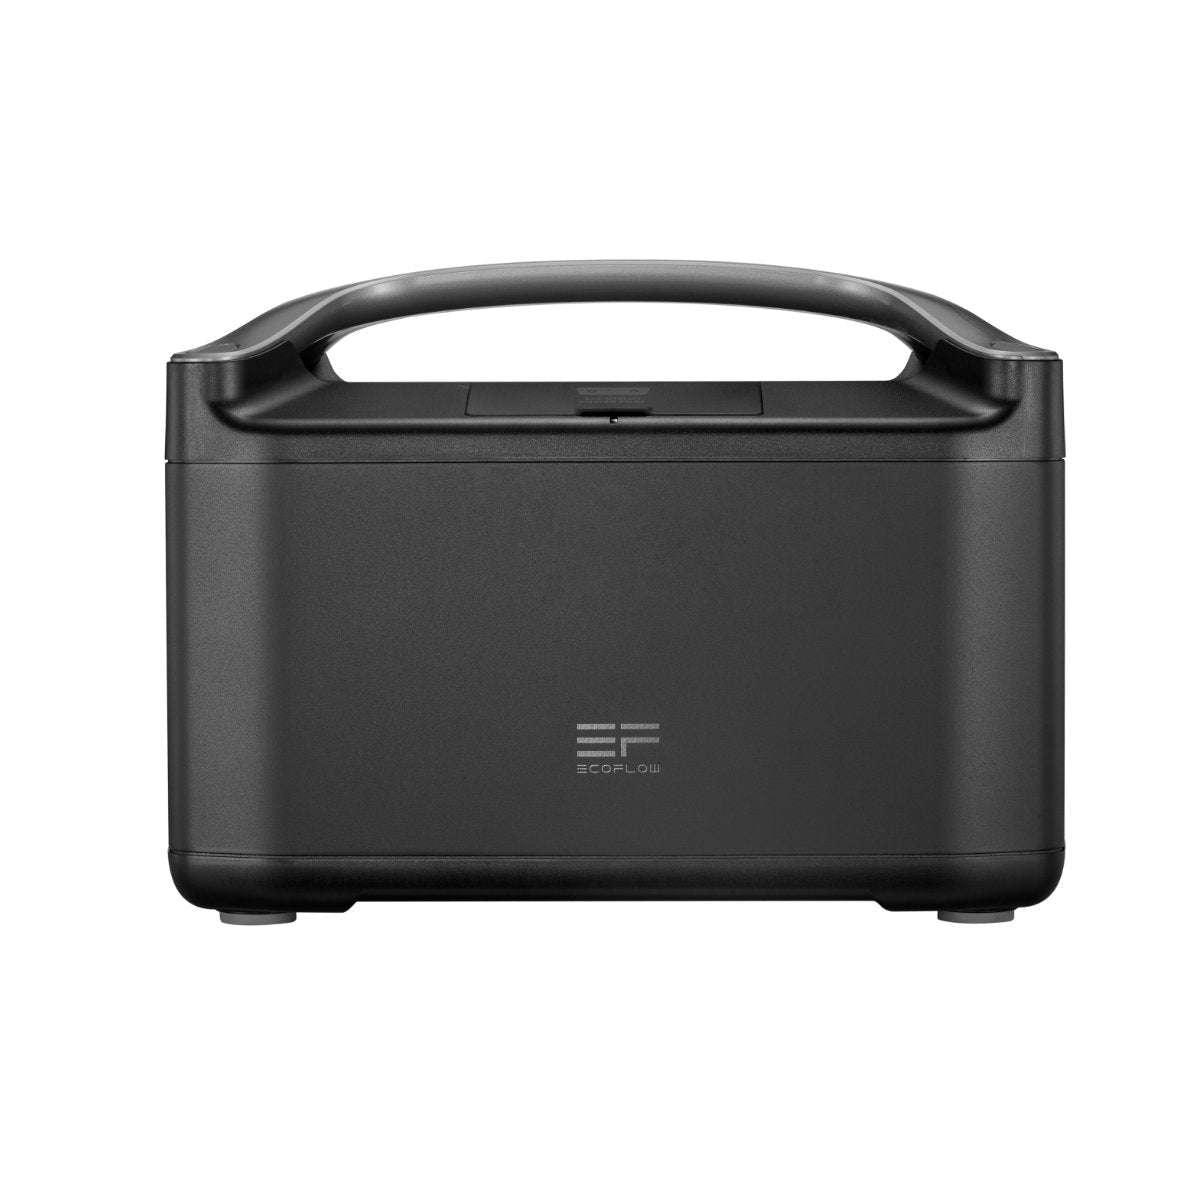 EcoFlow Extra Battery 720Wh For River Pro Portable Power Station EFRIVER600PRO-EB-UE